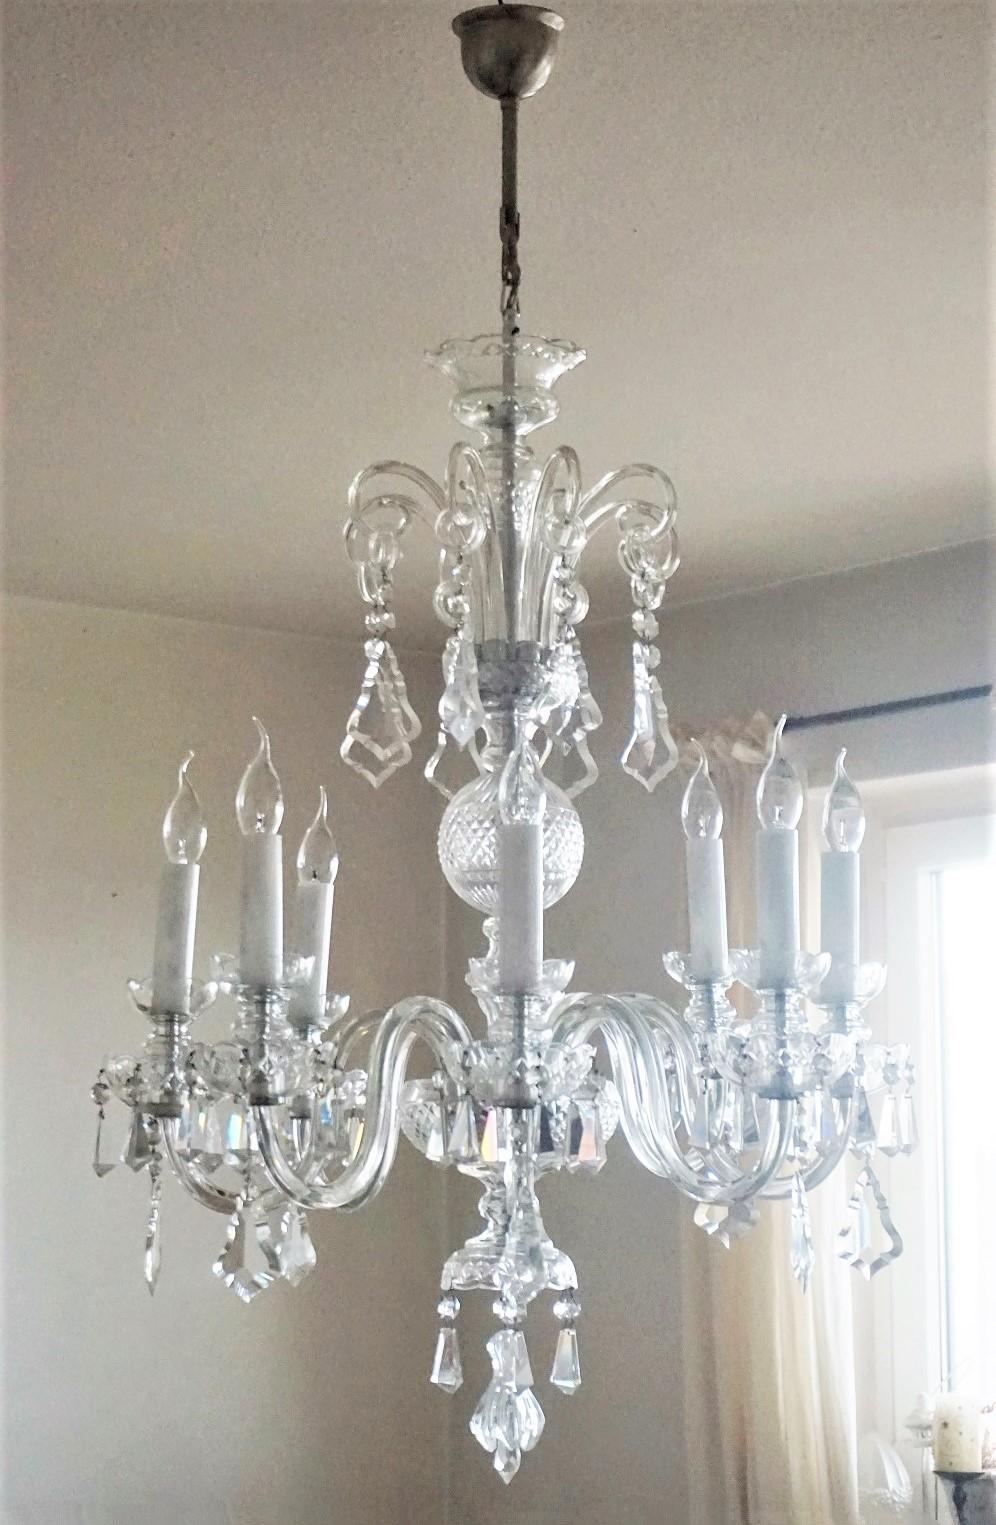 Large Murano Glass Crystal Chandelier, Italy, 1910-1920 For Sale 1